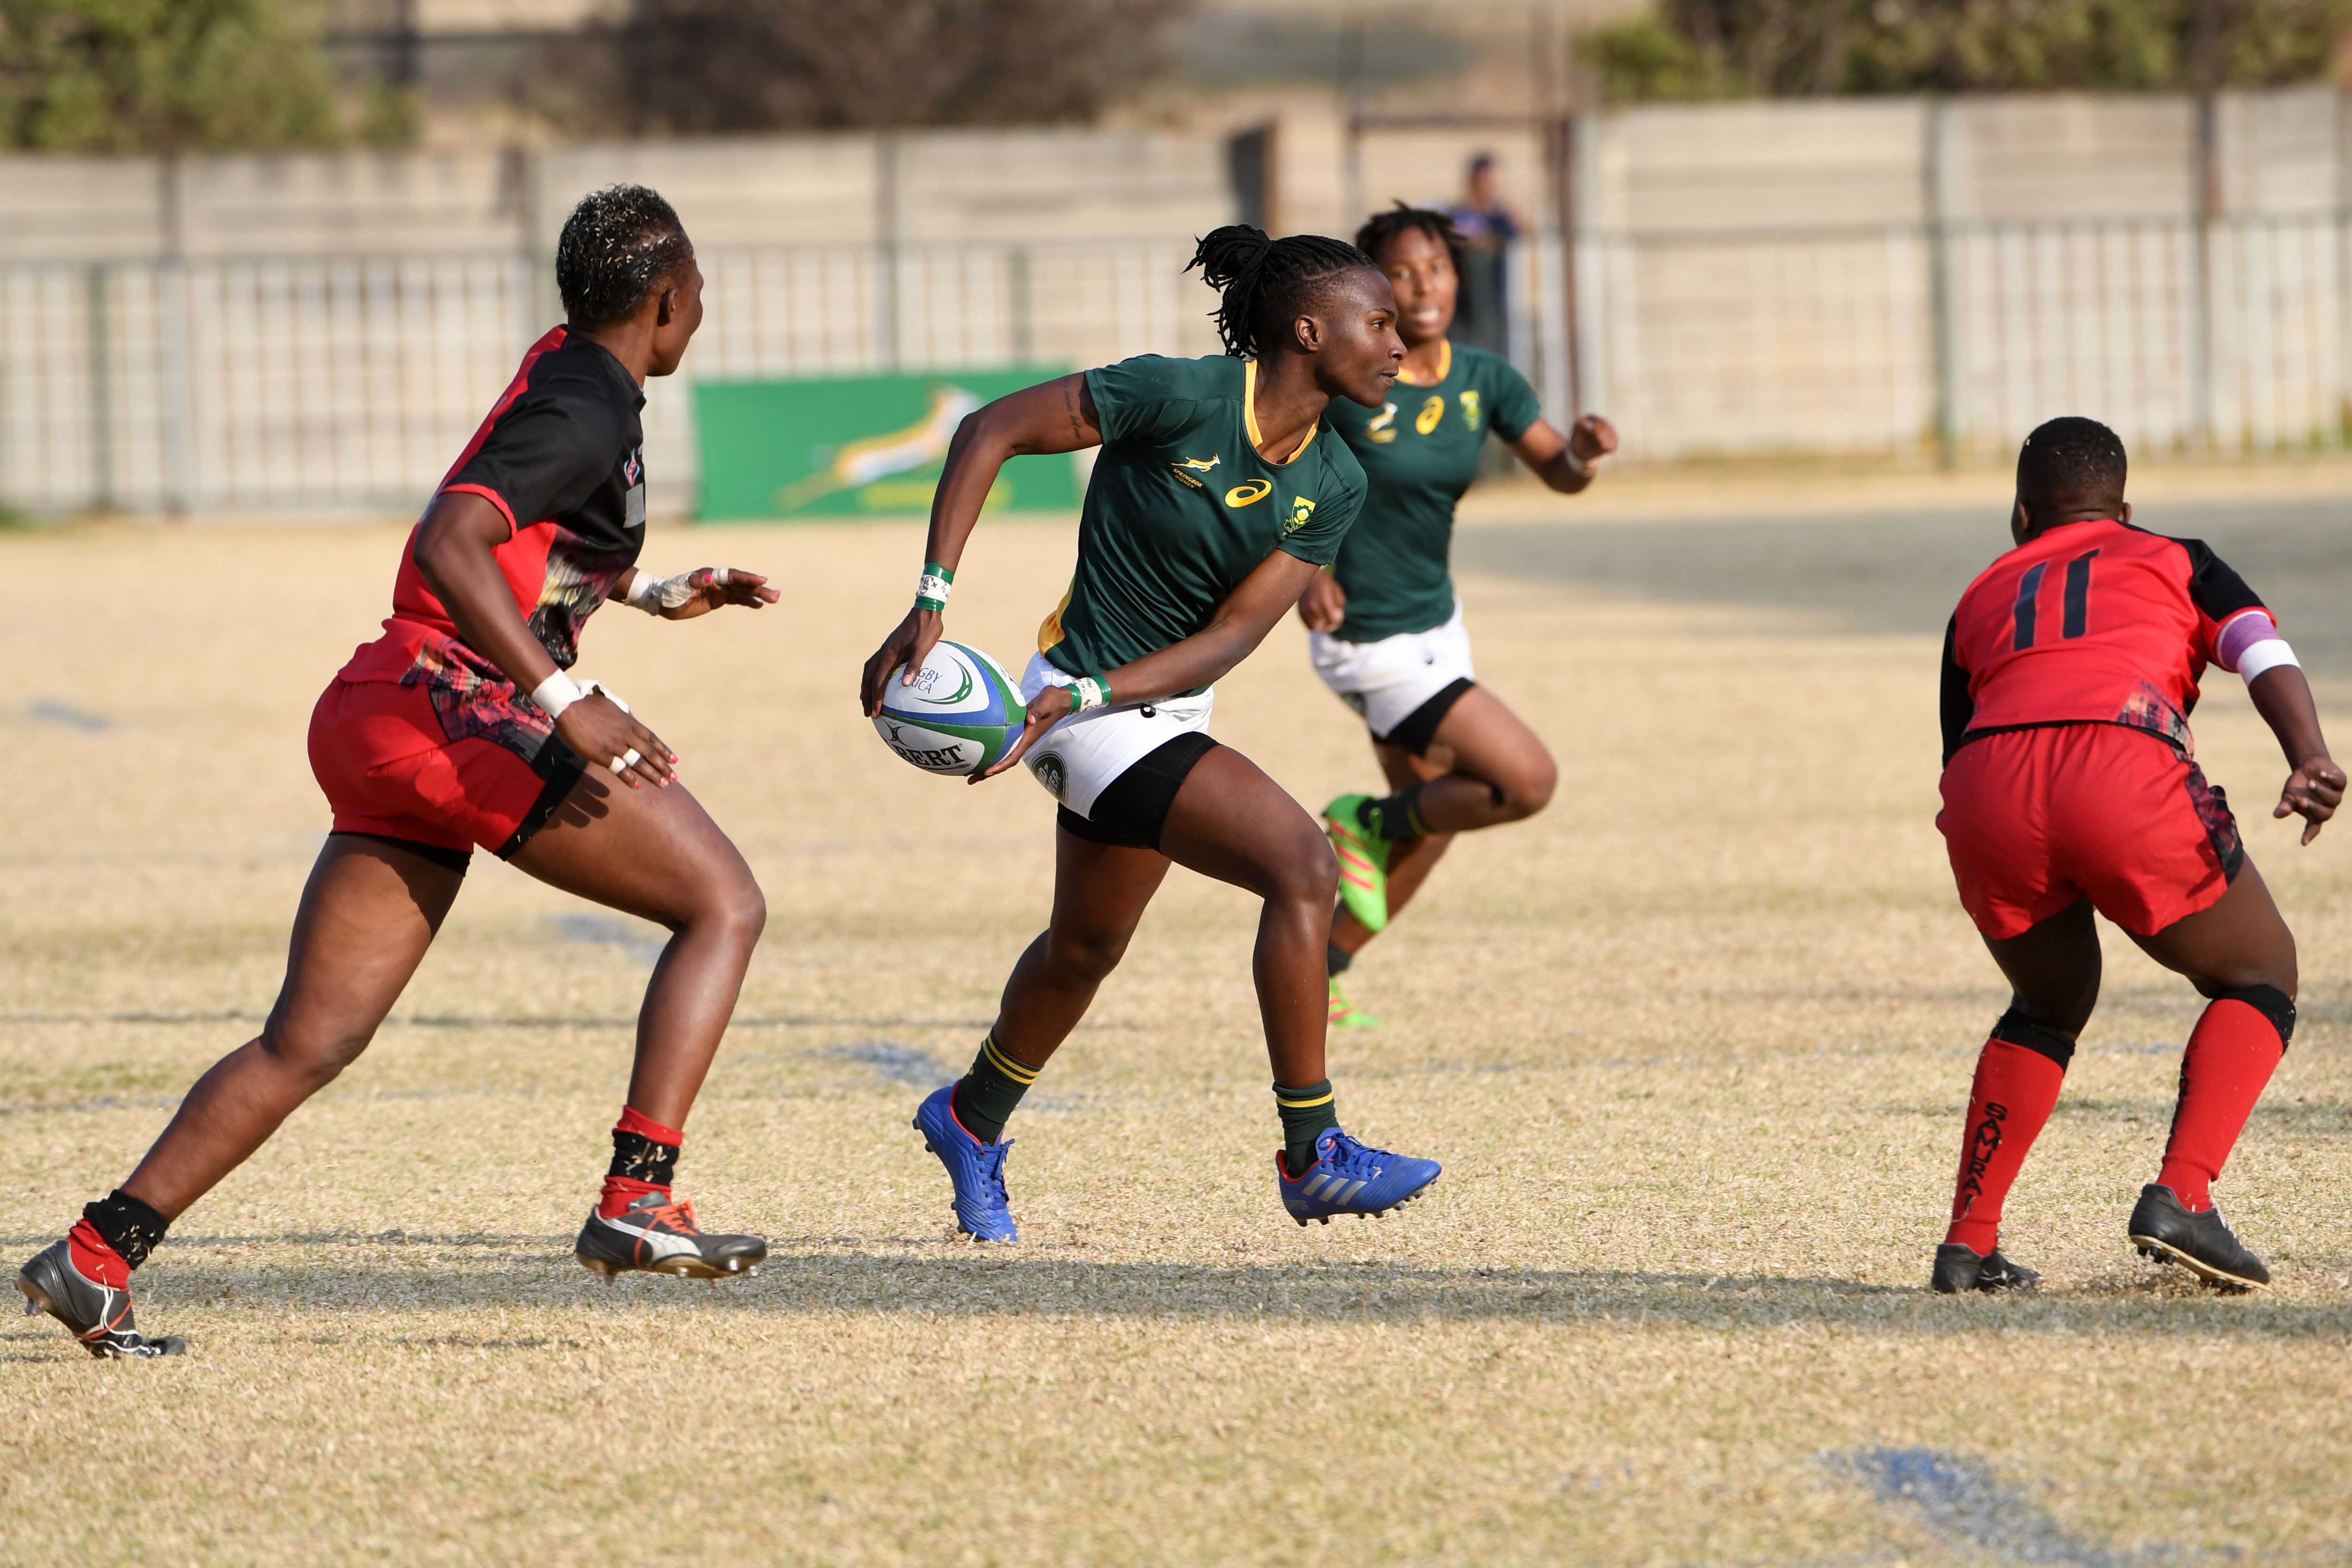 Rugby Africa Cup 2020 sets a first milestone for gender equality in rugby